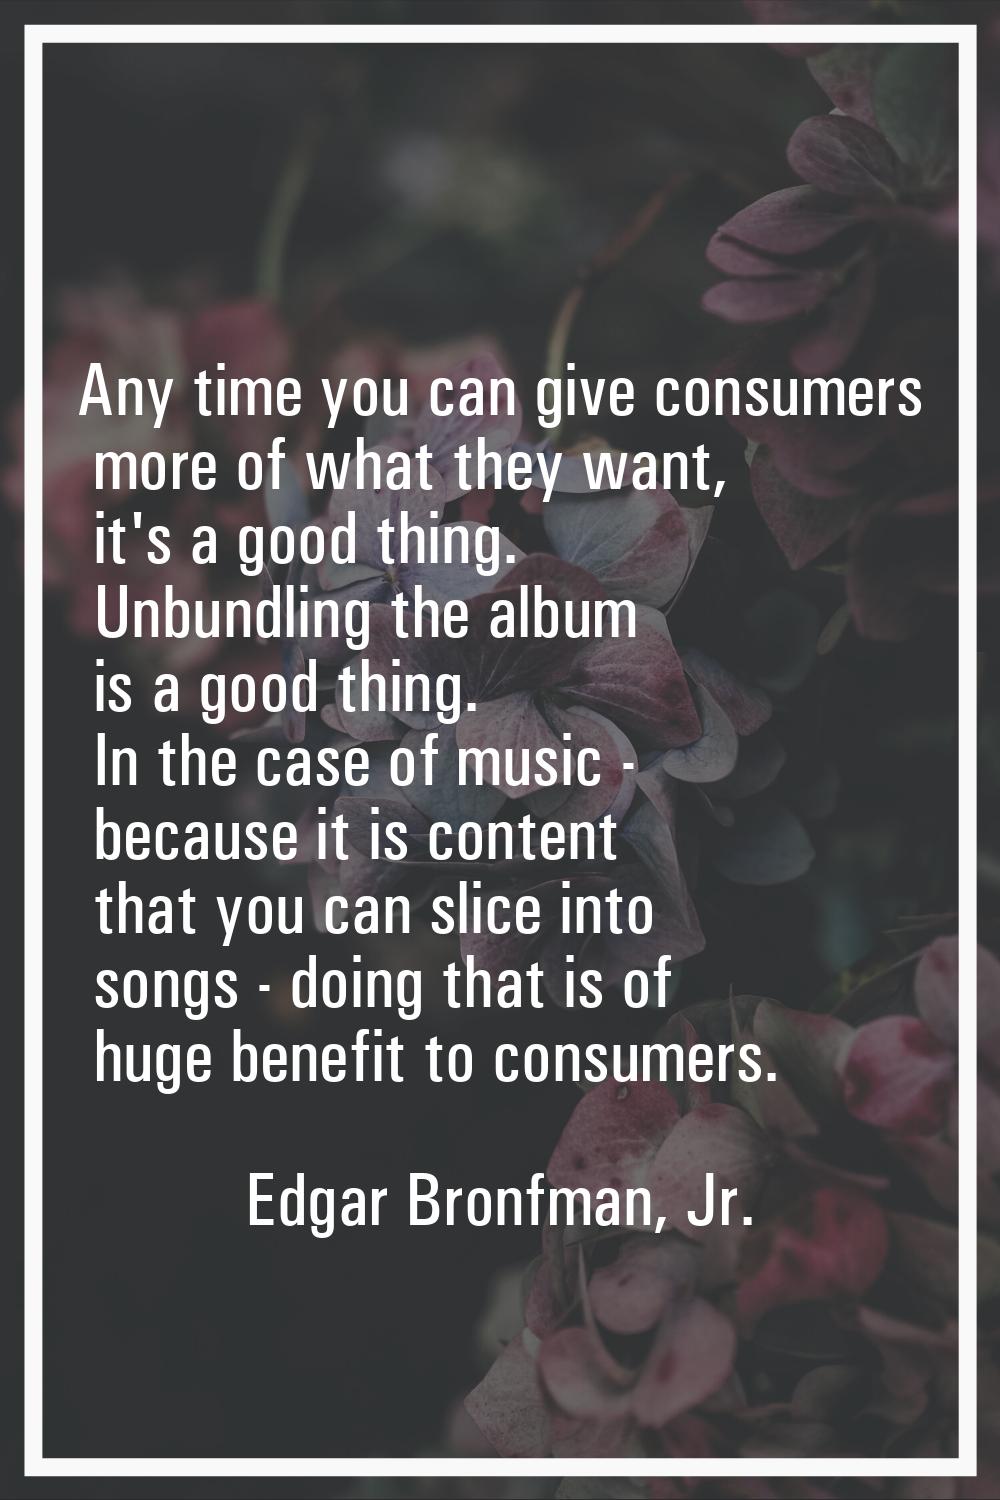 Any time you can give consumers more of what they want, it's a good thing. Unbundling the album is 